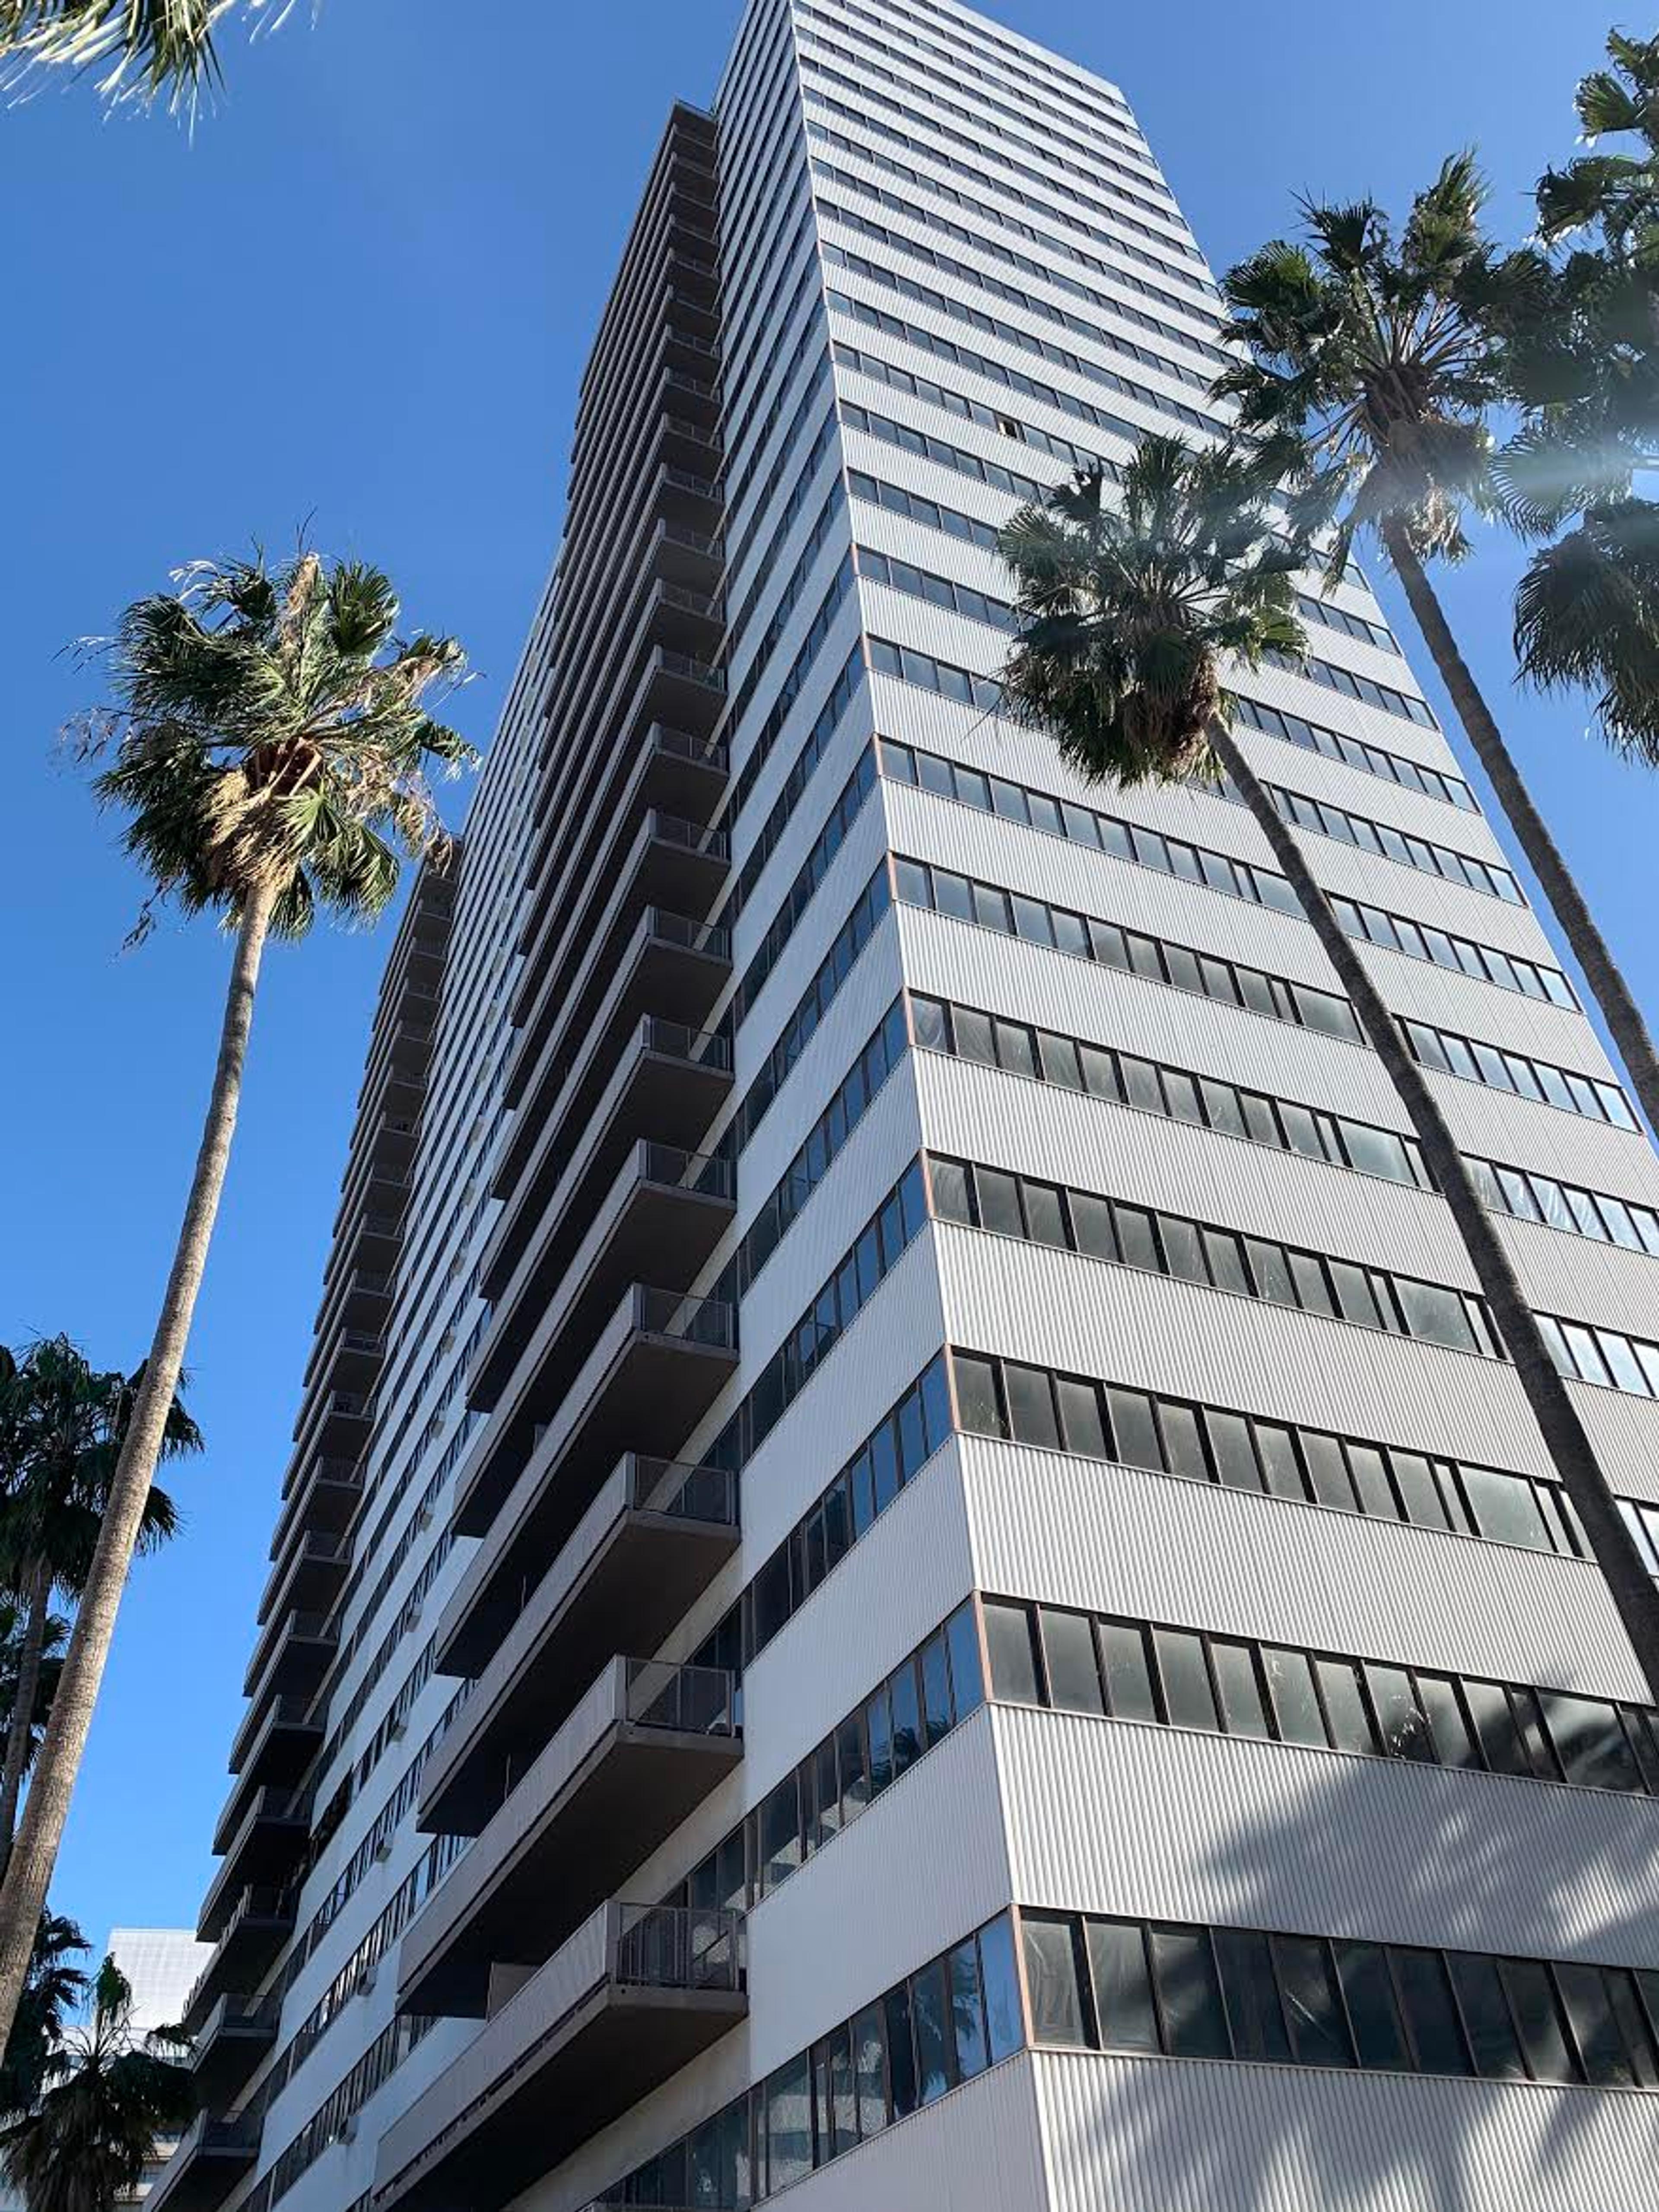 Picture of Barrington Plaza, a high-rise apartment complex in Los Angeles, against a blue sky and flanked with tall palm trees.